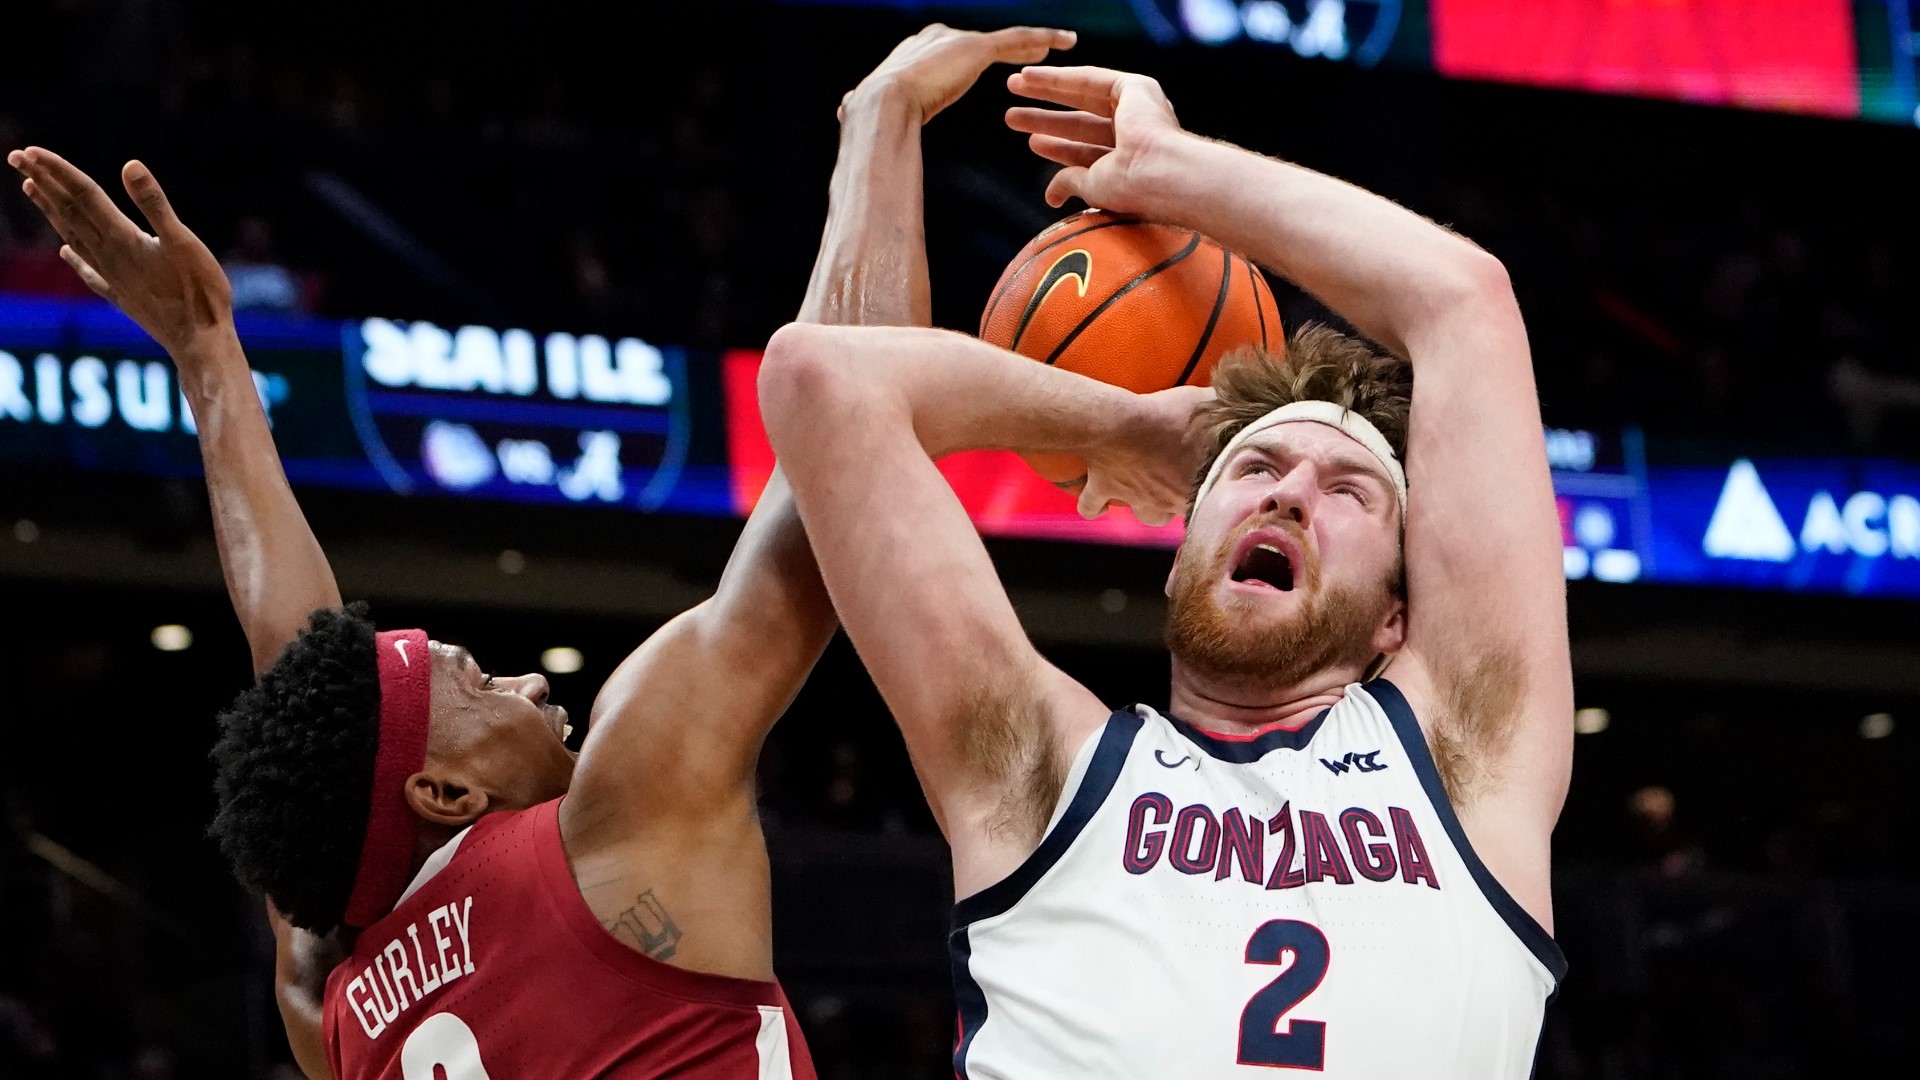 A poor first half doomed No. 3 Gonzaga in a 91-82 loss to No. 16 Alabama.